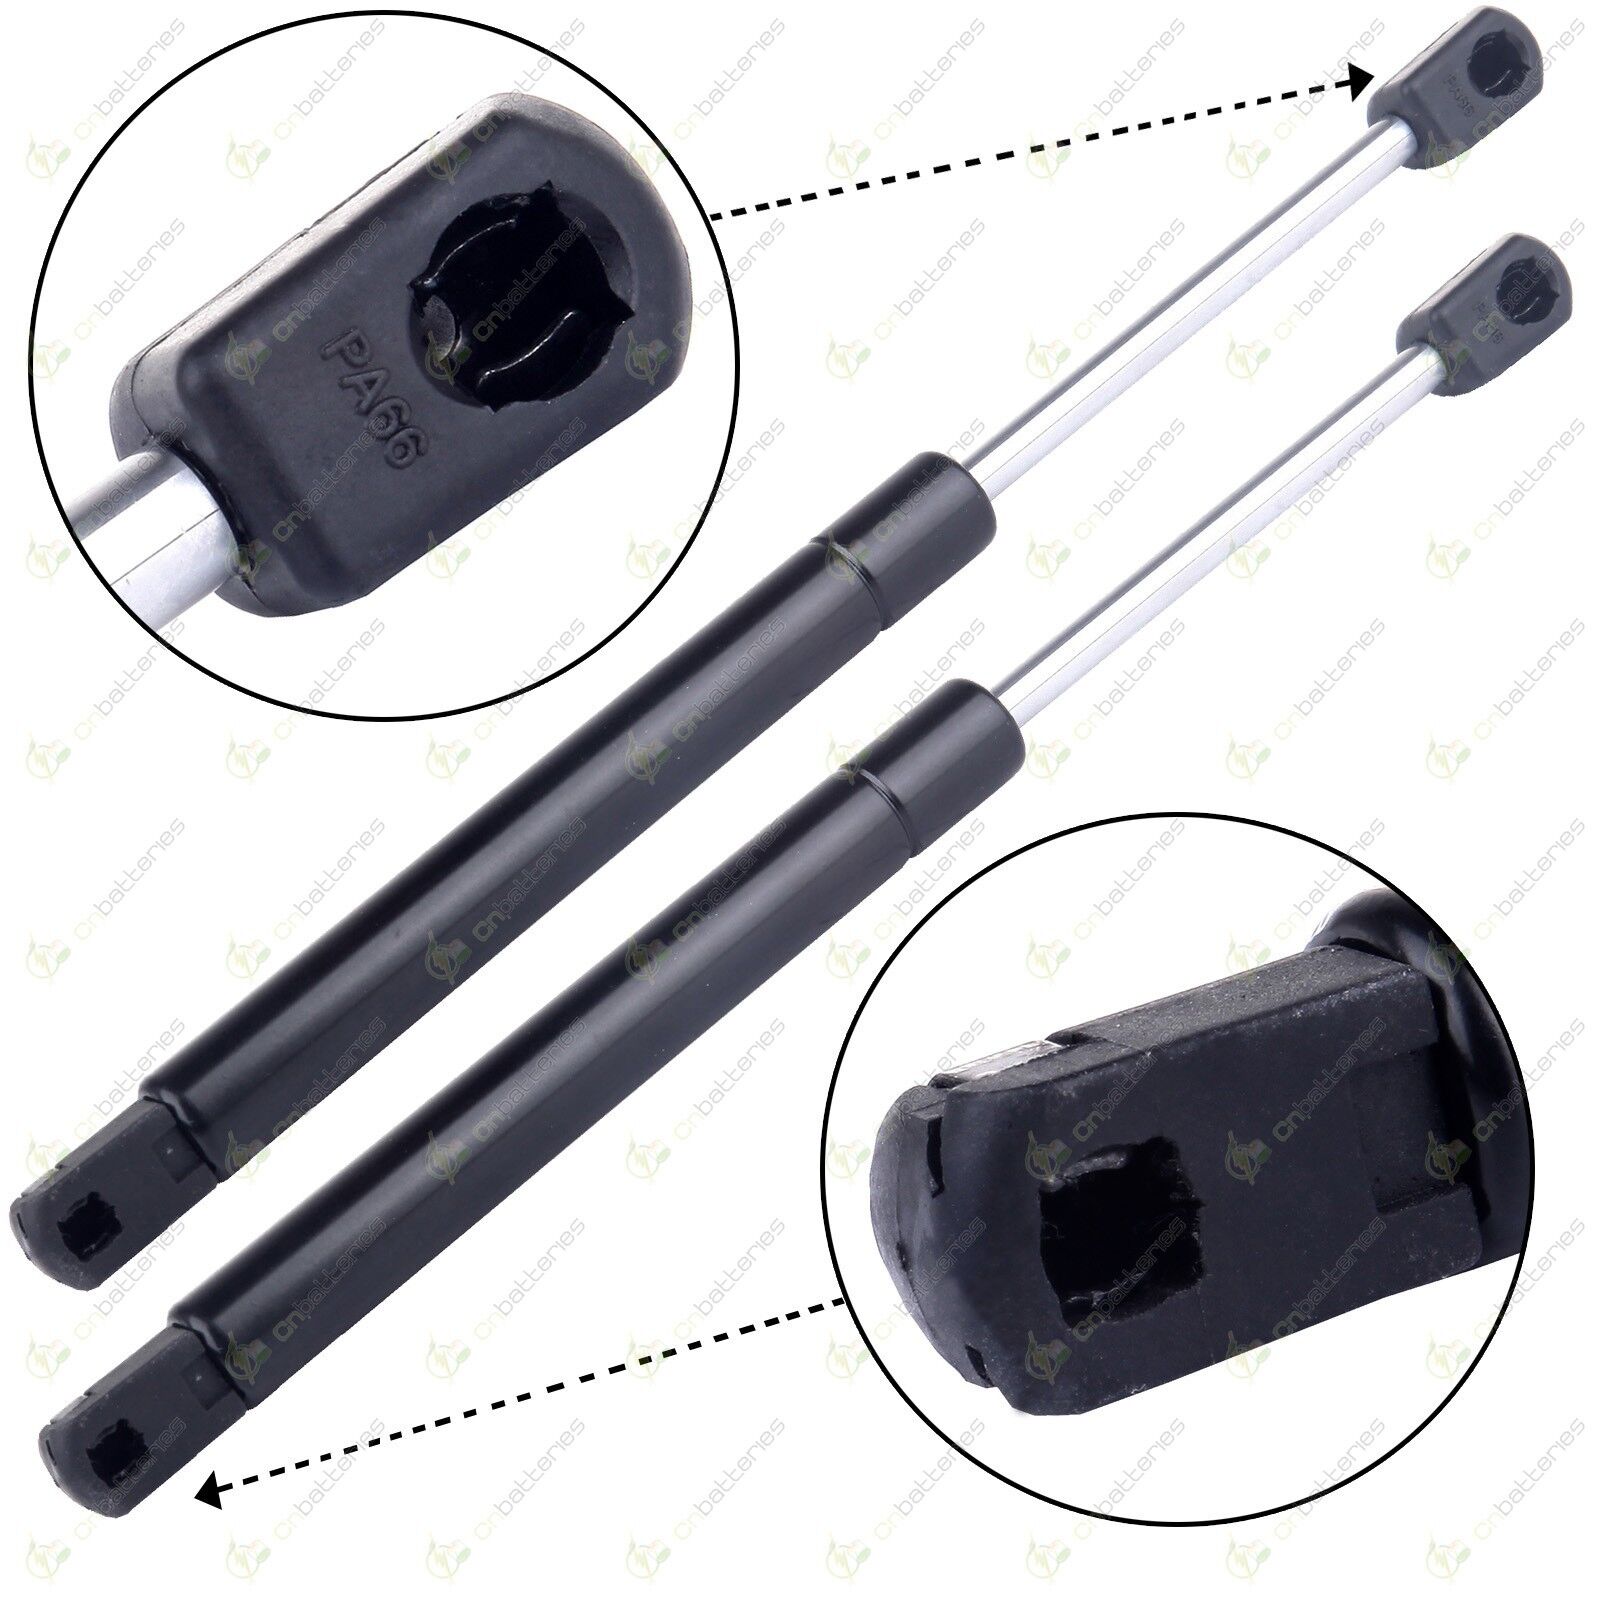 Qty(2) Rear Trunk Lift Supports Gas Struts Shocks For Buick Century 1999-2005